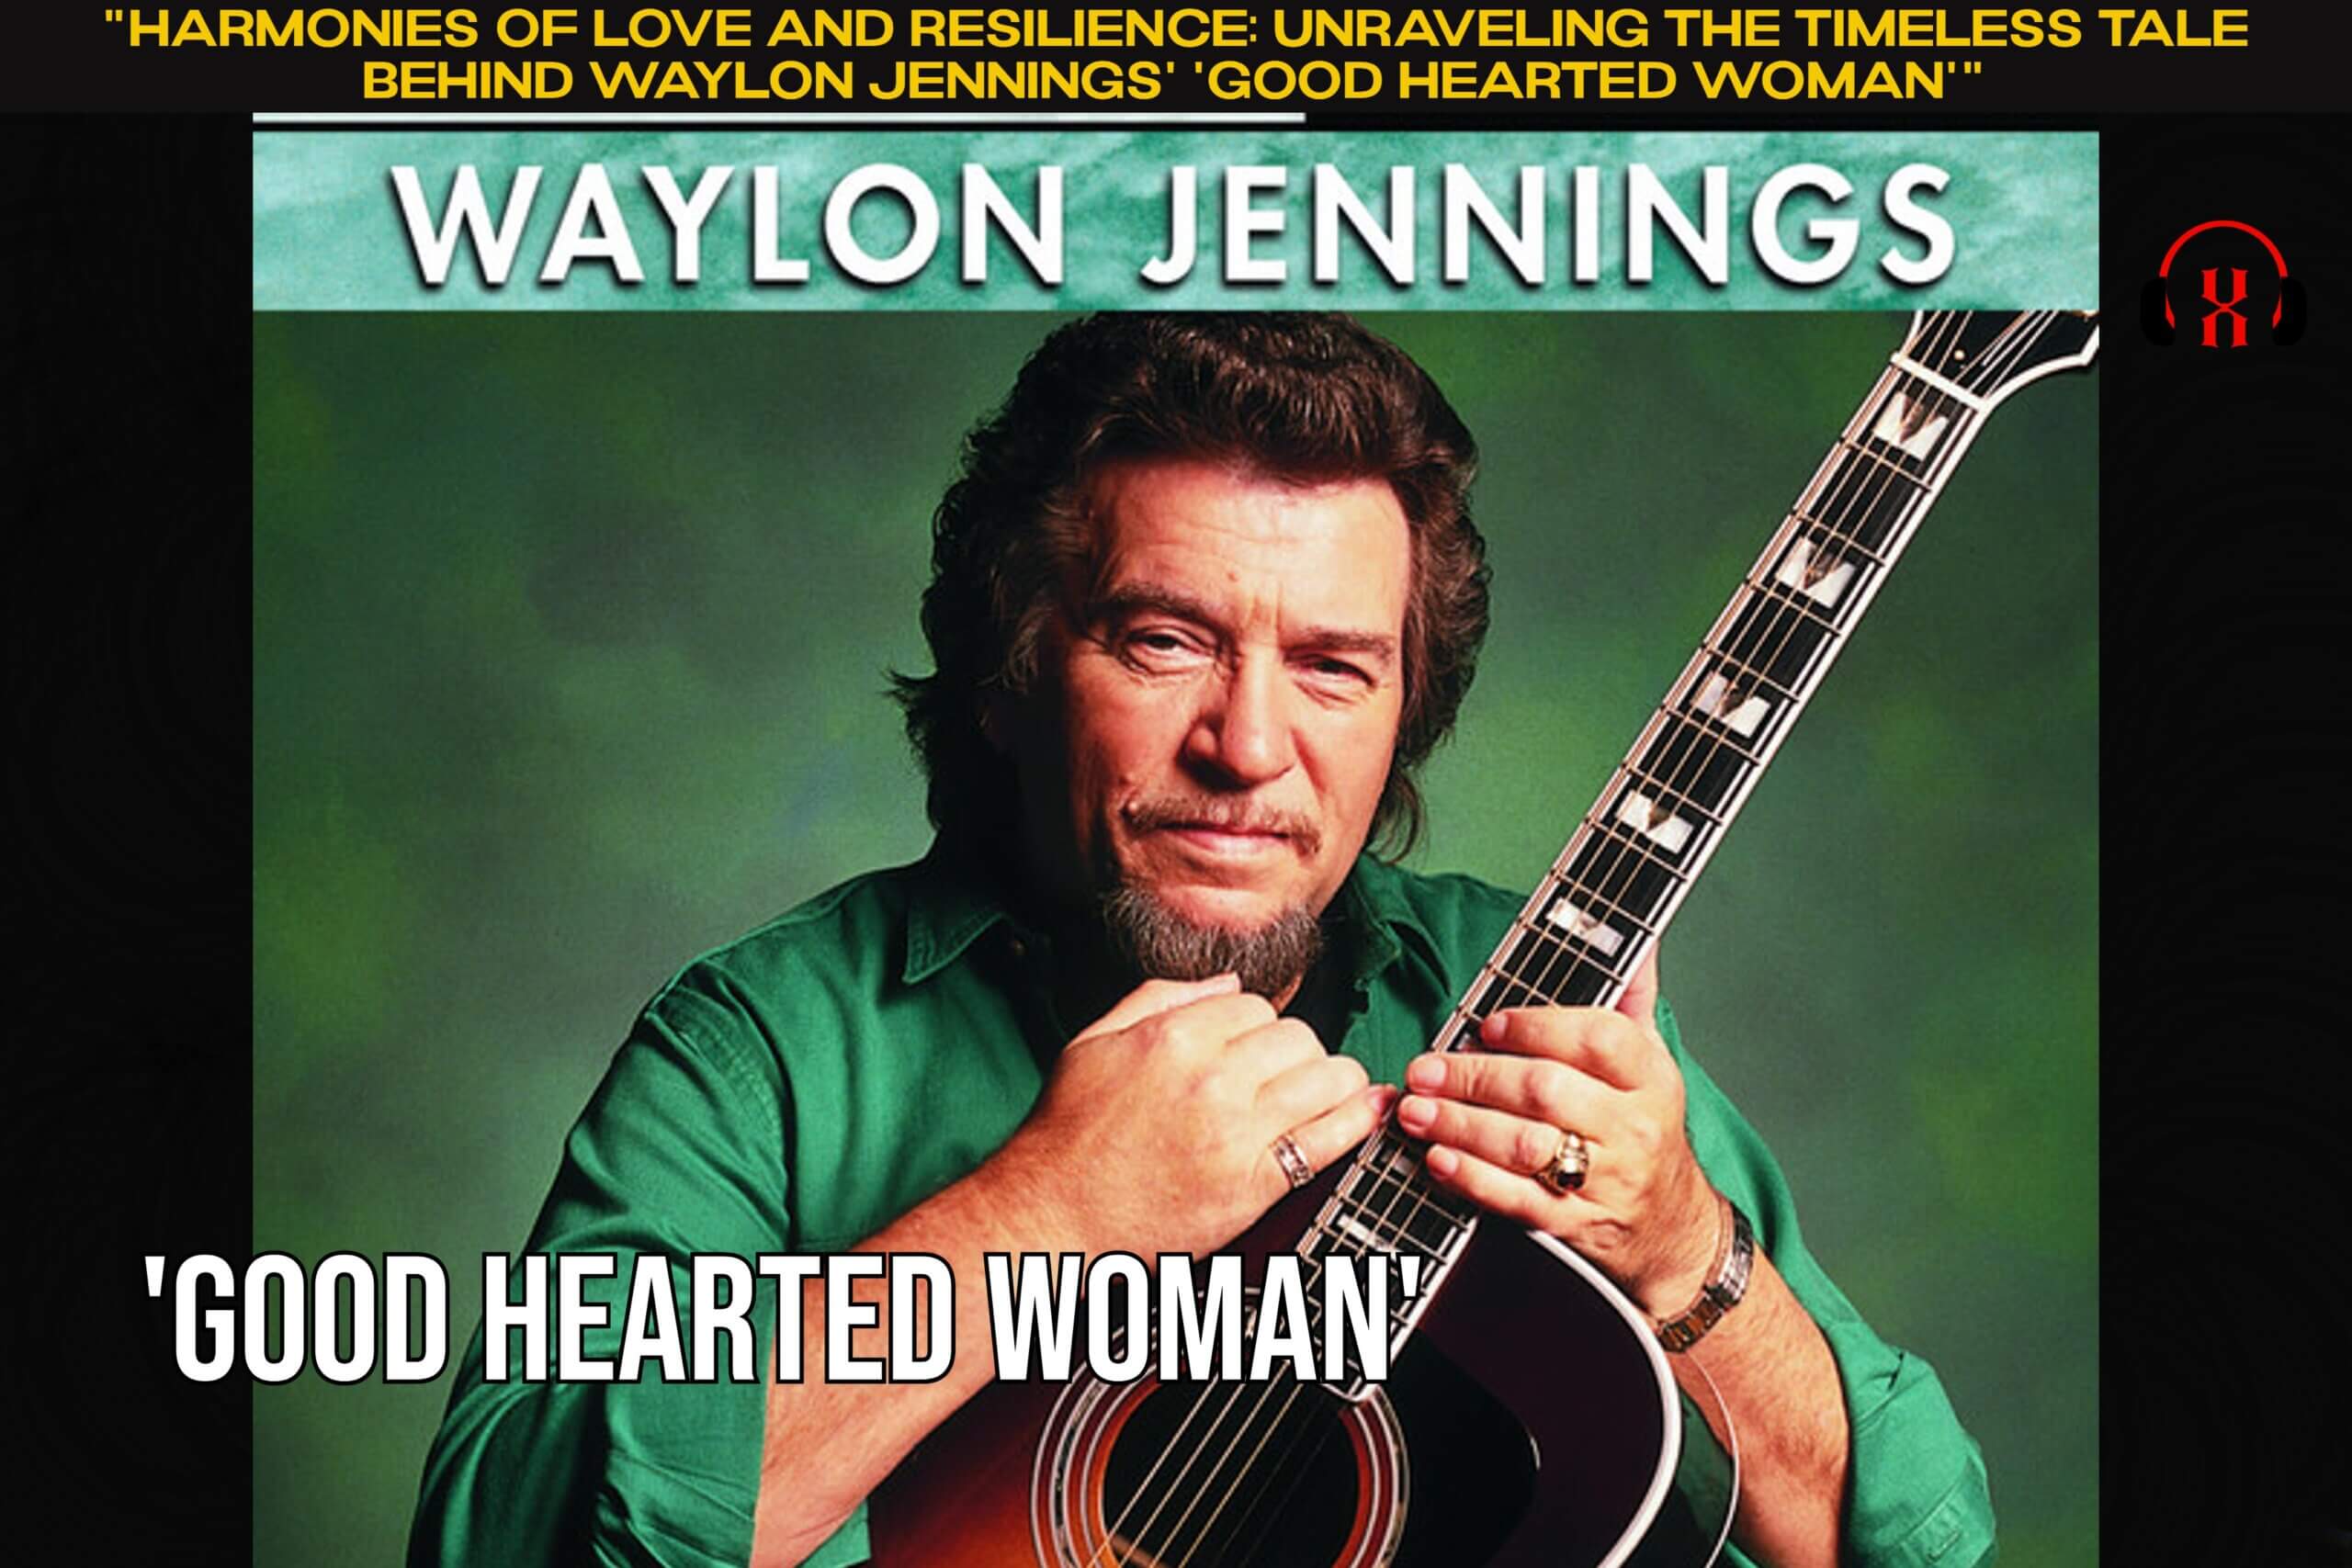 “Harmonies of Love and Resilience: Unraveling the Timeless Tale Behind Waylon Jennings’ ‘Good Hearted Woman'”